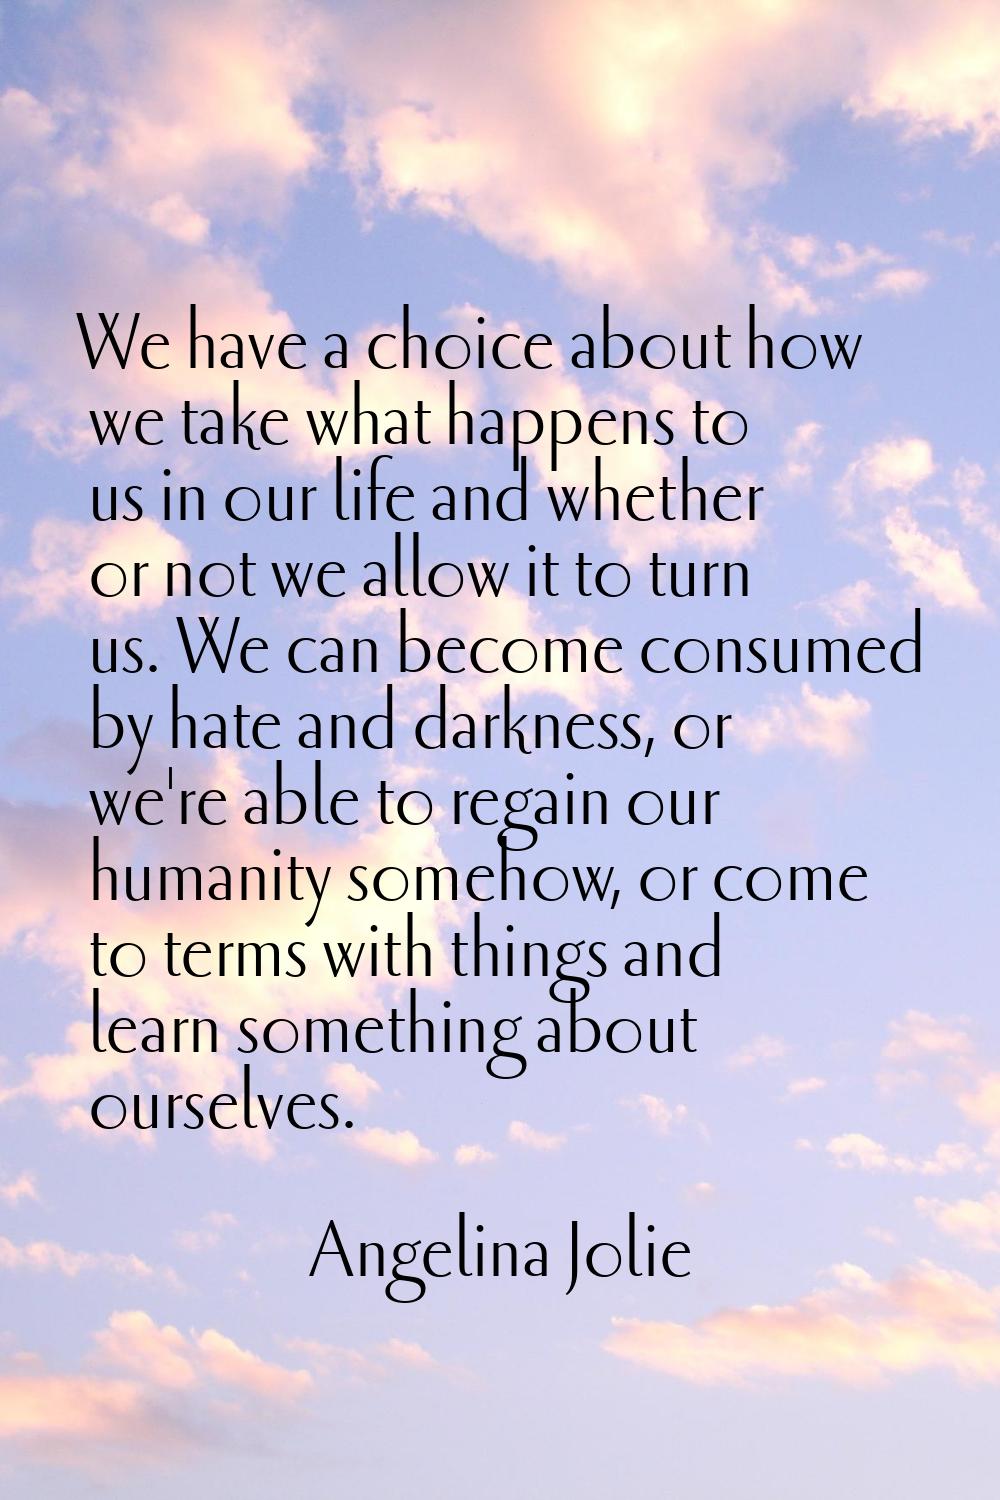 We have a choice about how we take what happens to us in our life and whether or not we allow it to